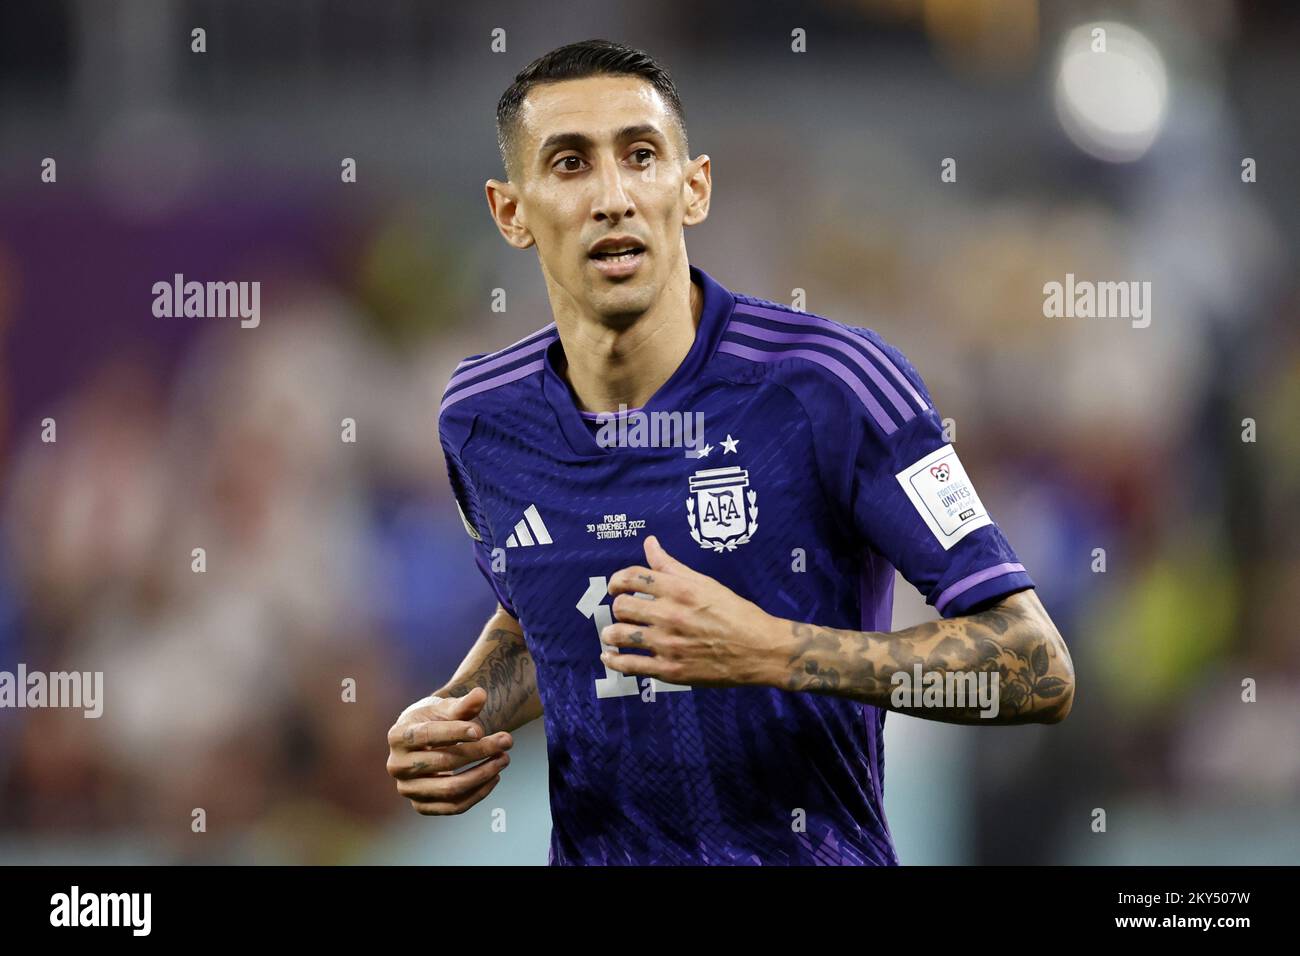 Doha, Qatar. 30th Nov, 2022. DOHA - Angel Di Maria of Argentina during the FIFA World Cup Qatar 2022 group C match between Poland and Argentina at 974 Stadium on November 30, 2022 in Doha, Qatar. AP | Dutch Height | MAURICE OF STONE Credit: ANP/Alamy Live News Stock Photo